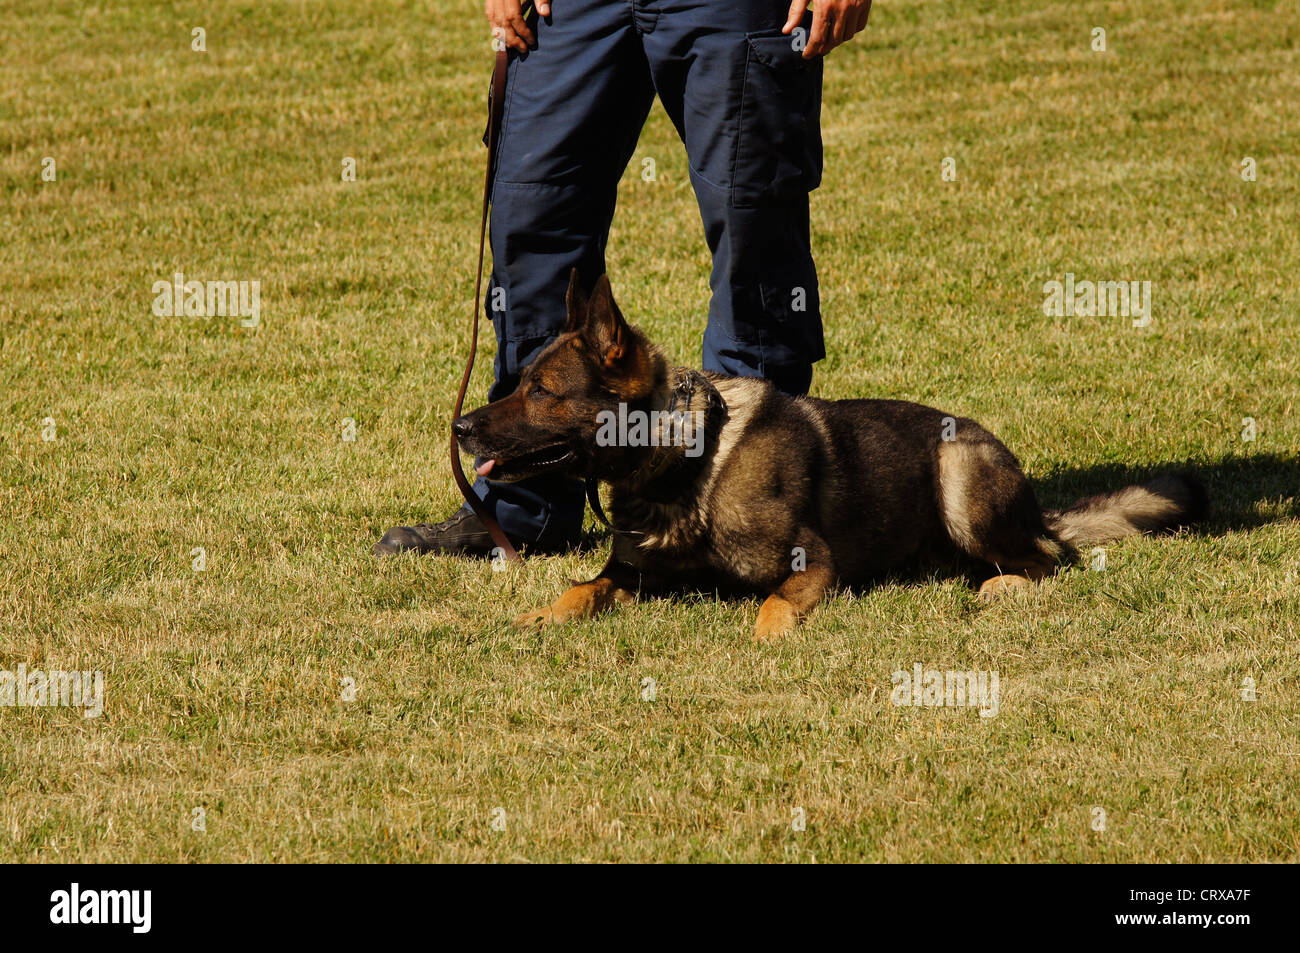 A police dog with his handler. Stock Photo